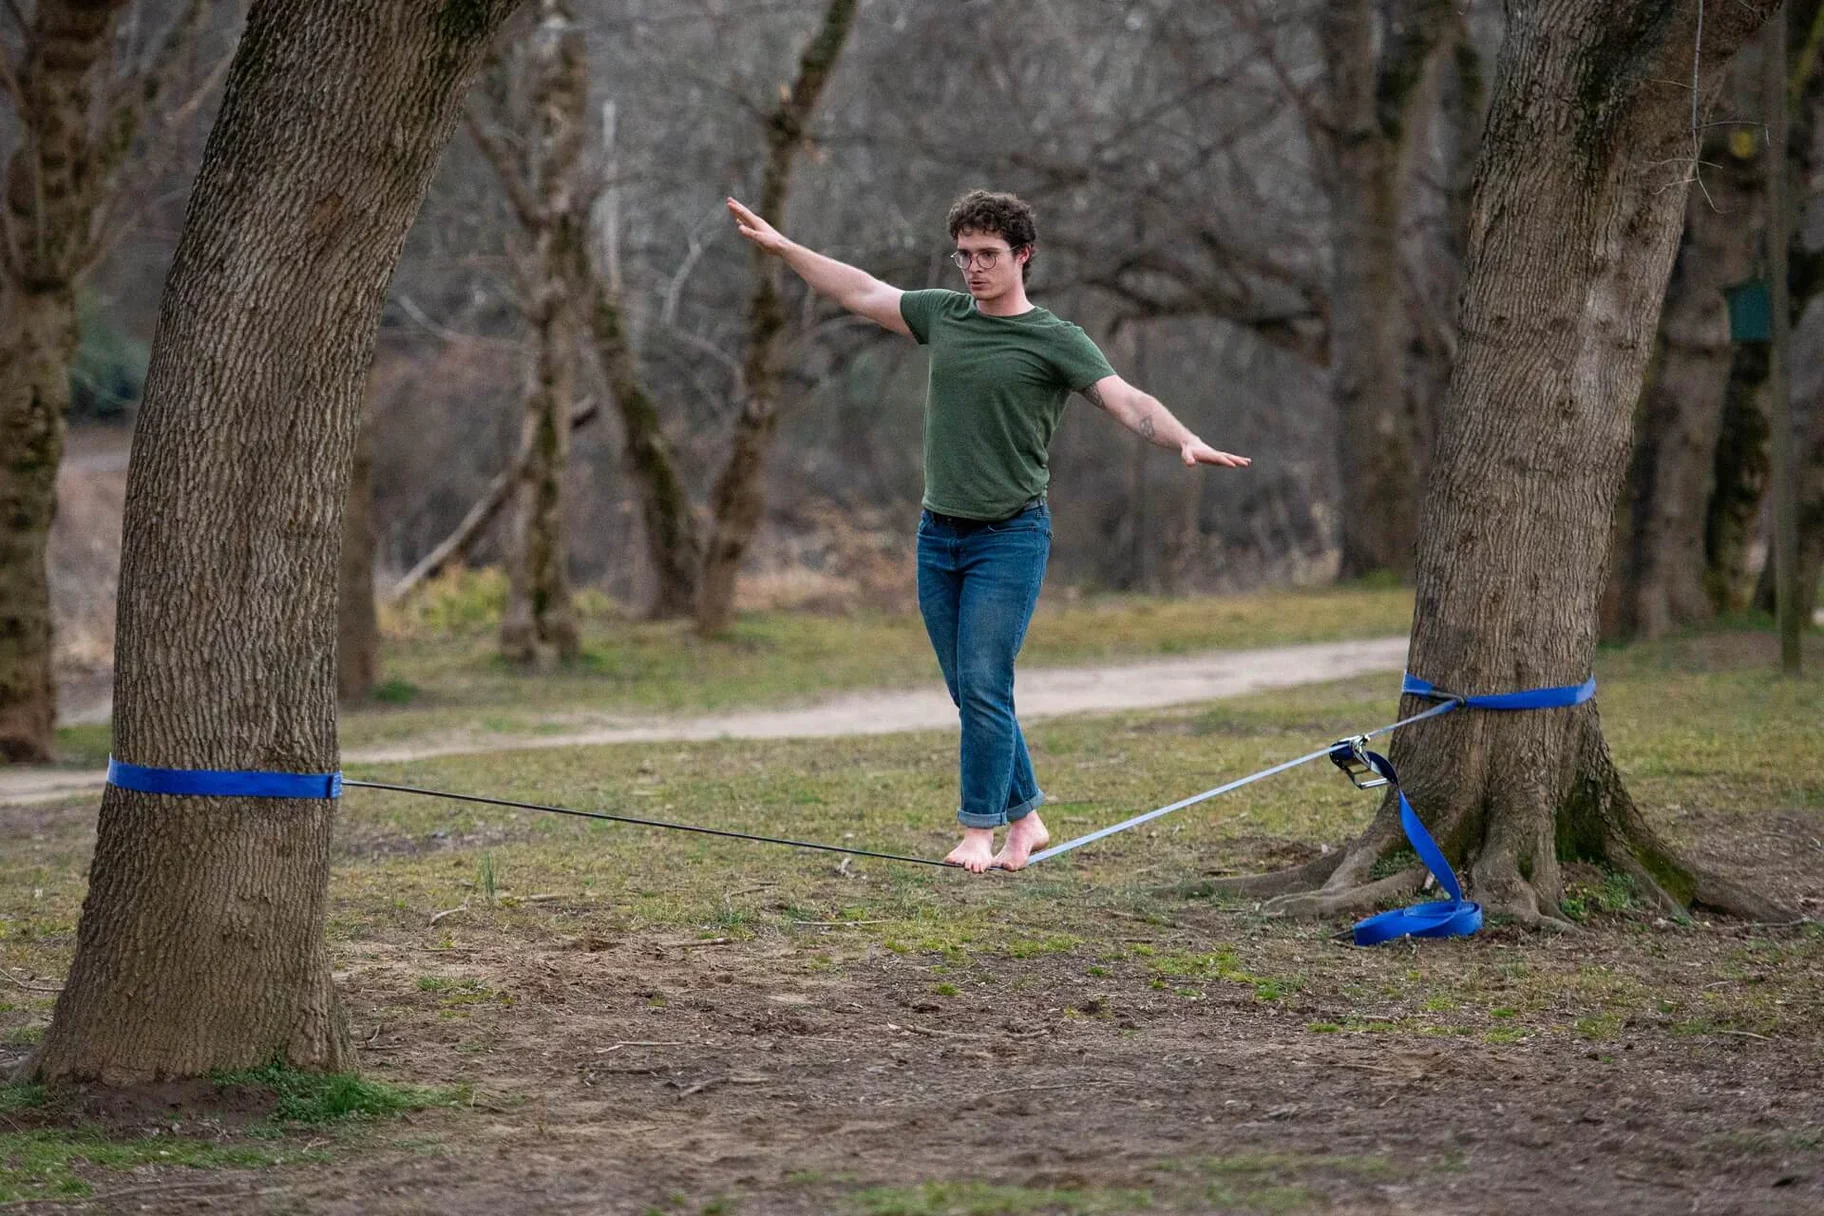 Slacklines - Balance, Strength, and Fun All in One